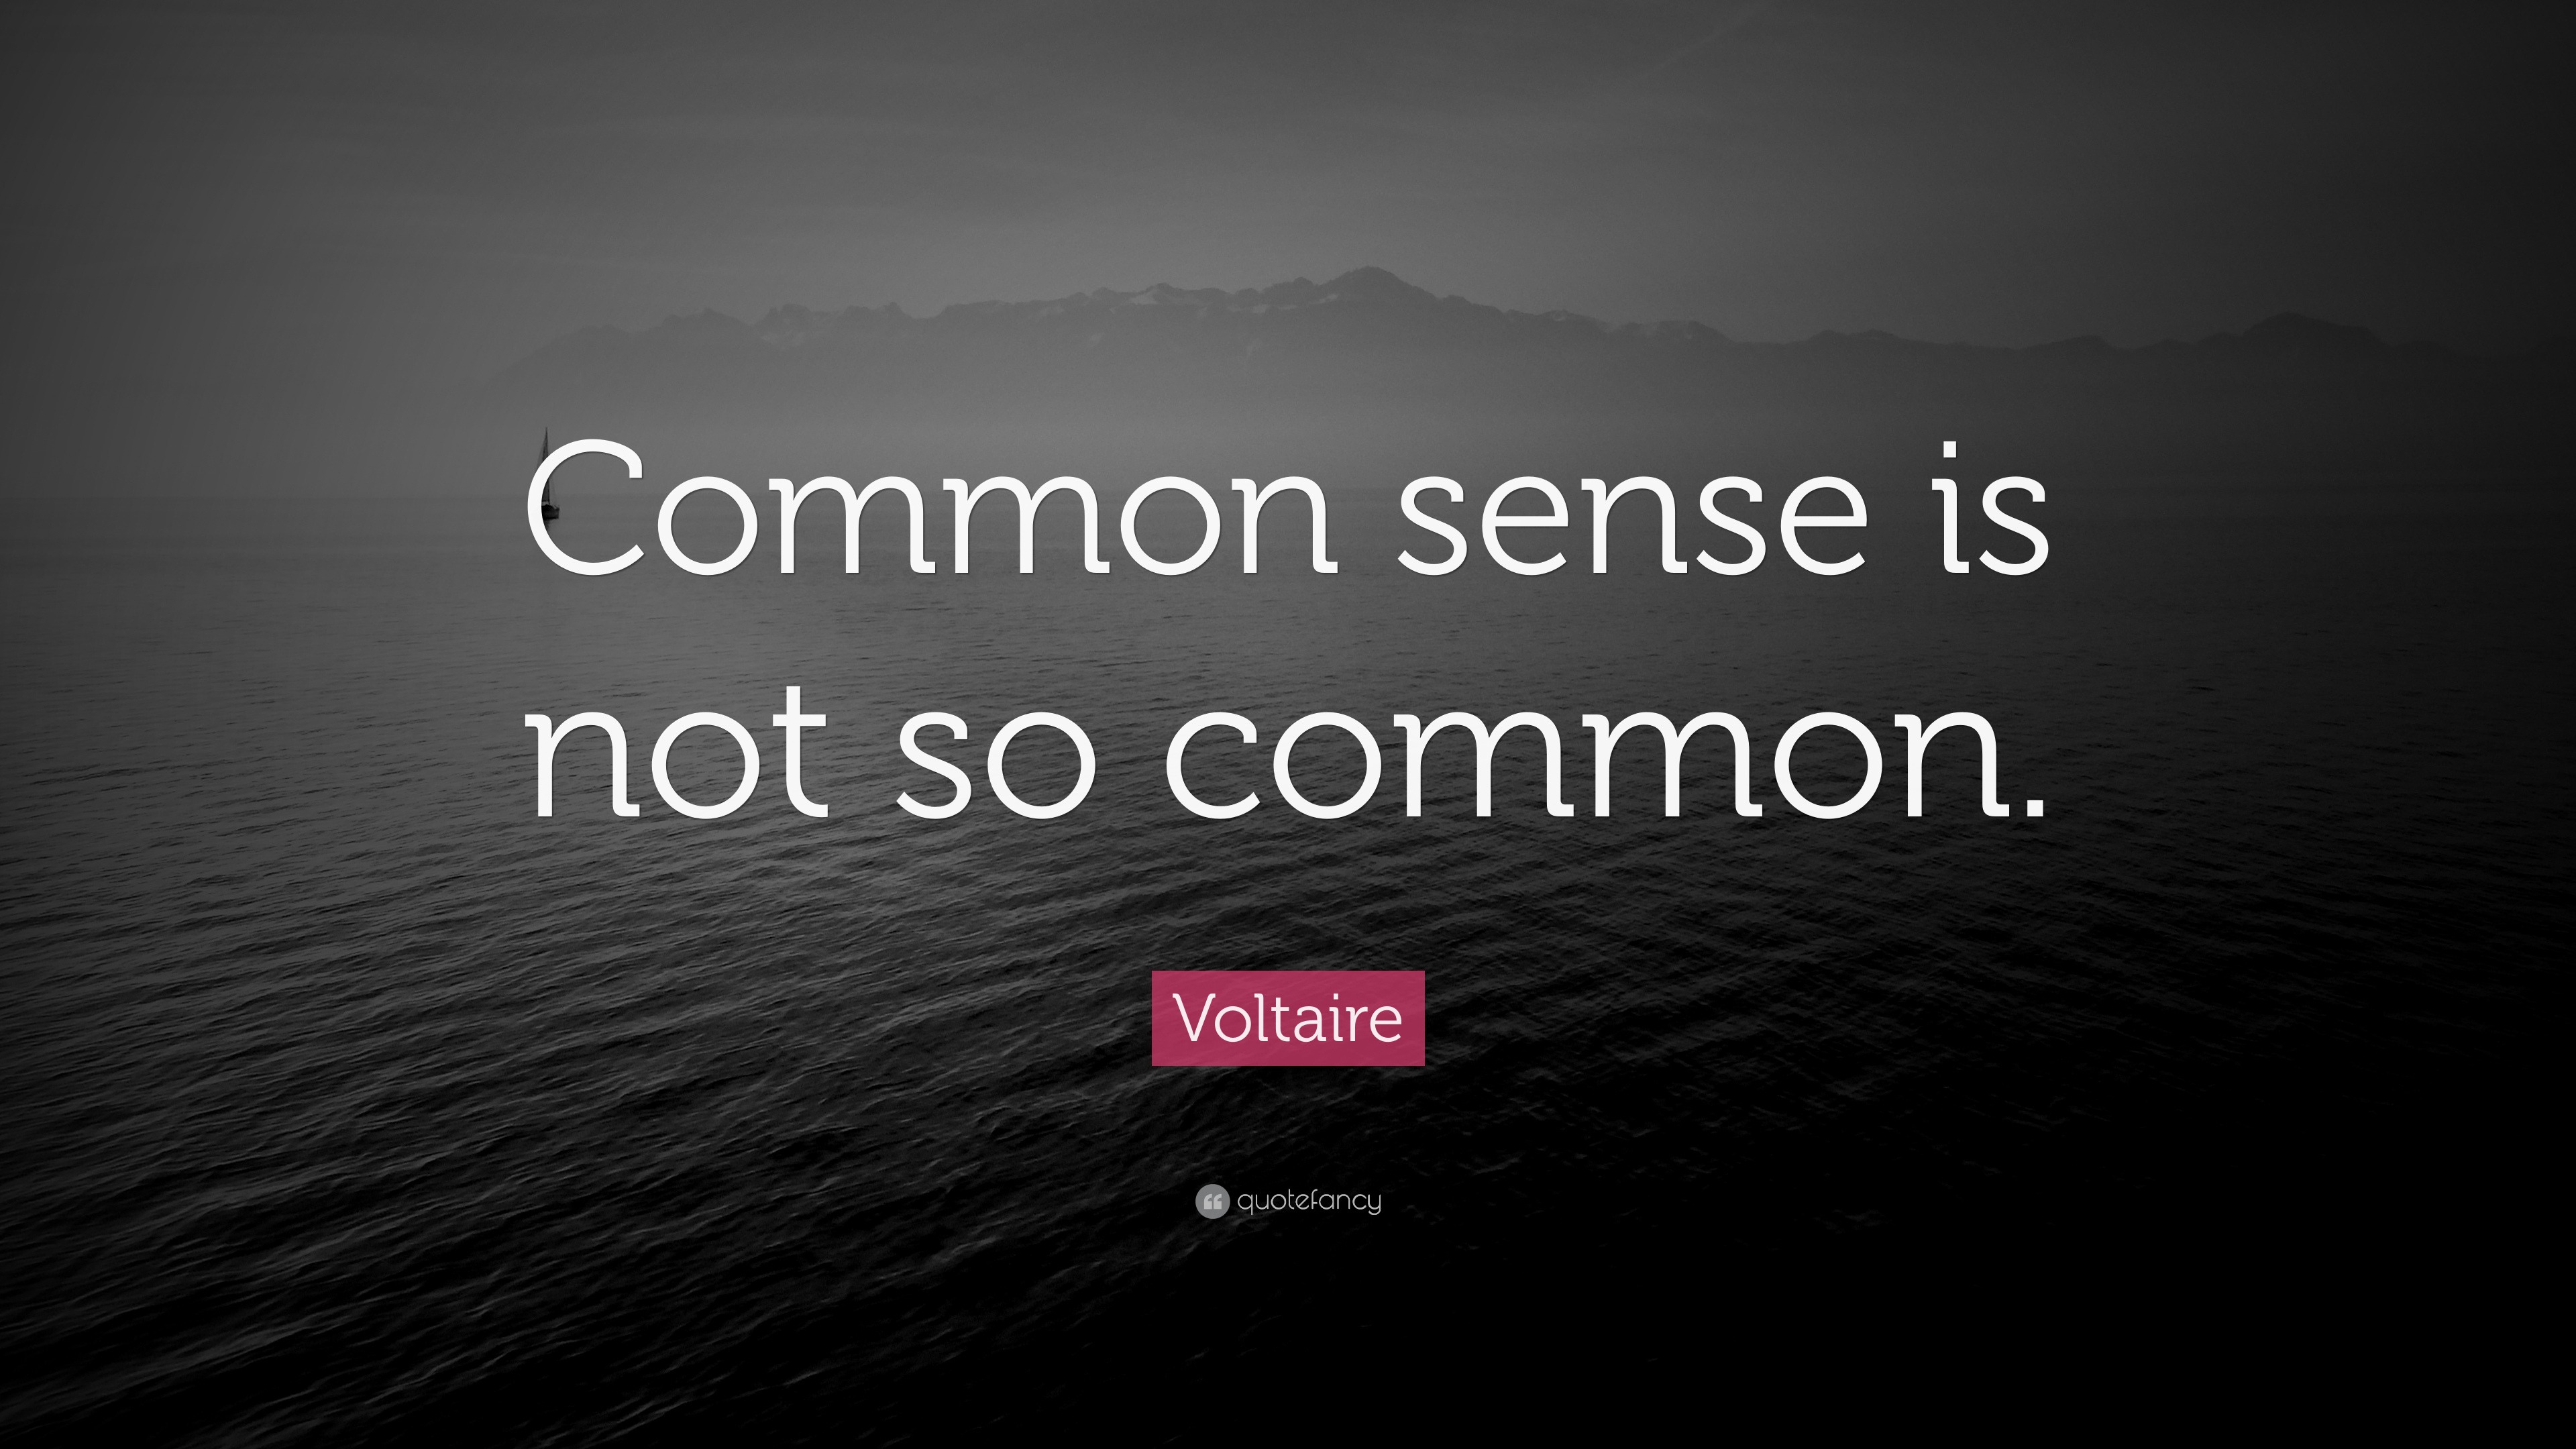 Voltaire Quote: “Common sense is not so common.” (12 wallpapers